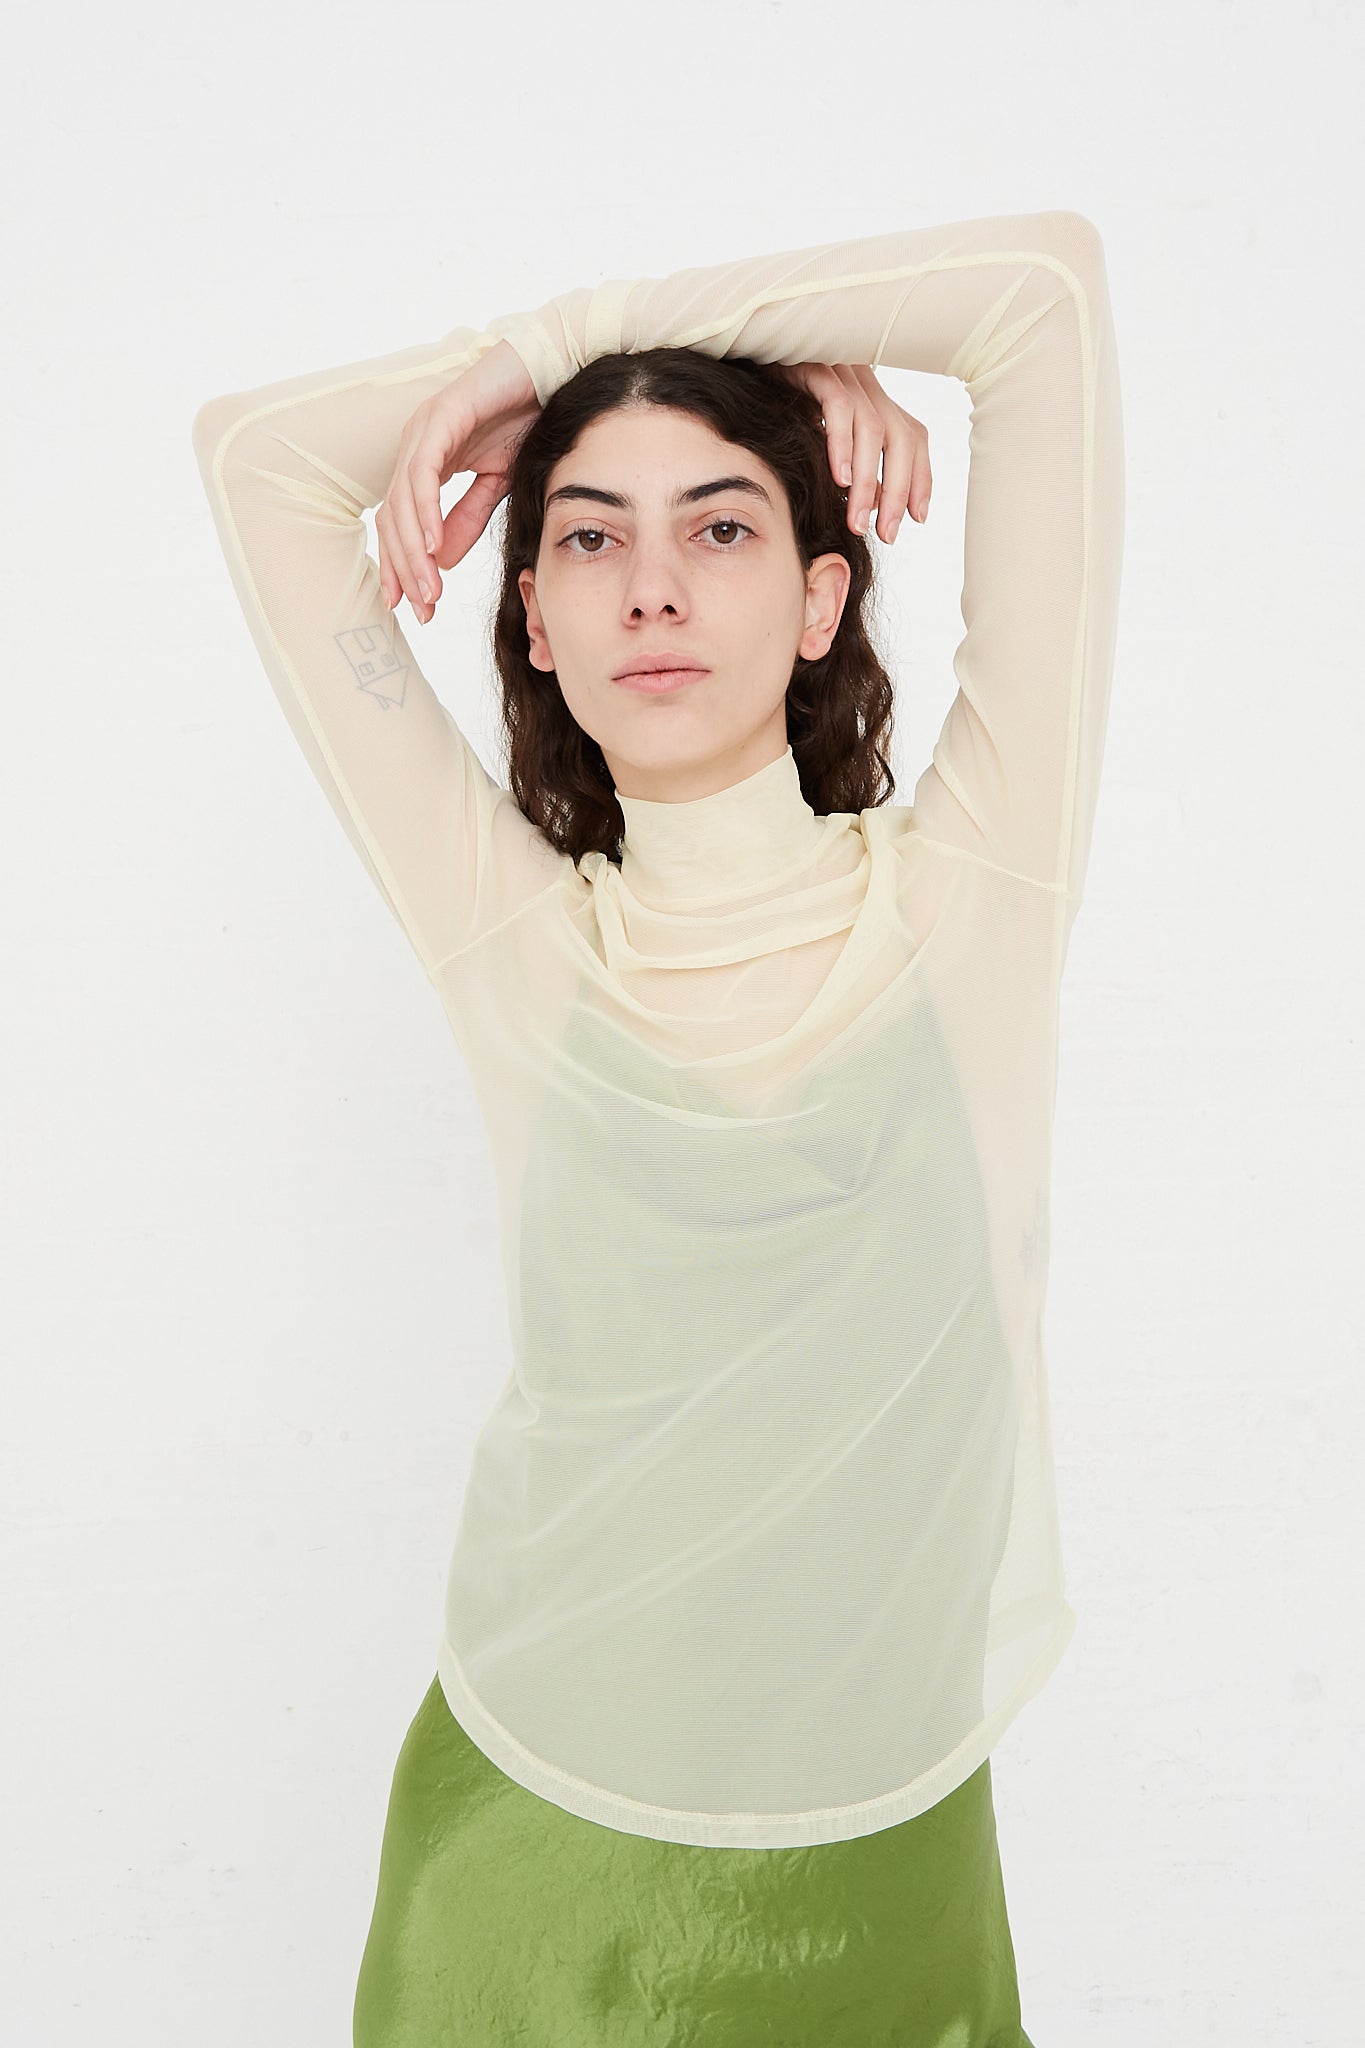 A model wearing a green skirt and a cream turtle neck top, available at Oroboro Store.